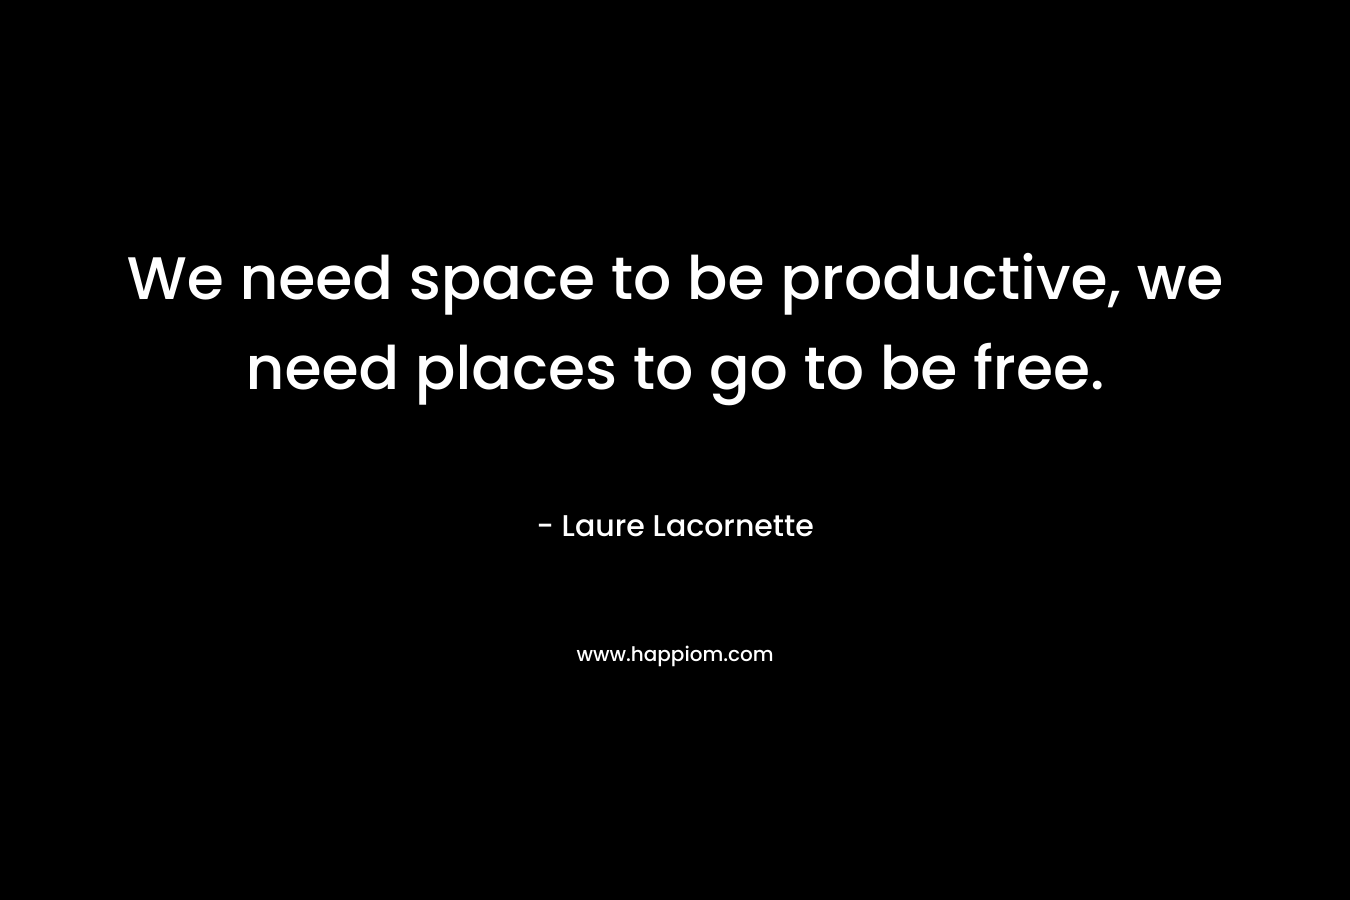 We need space to be productive, we need places to go to be free. – Laure Lacornette